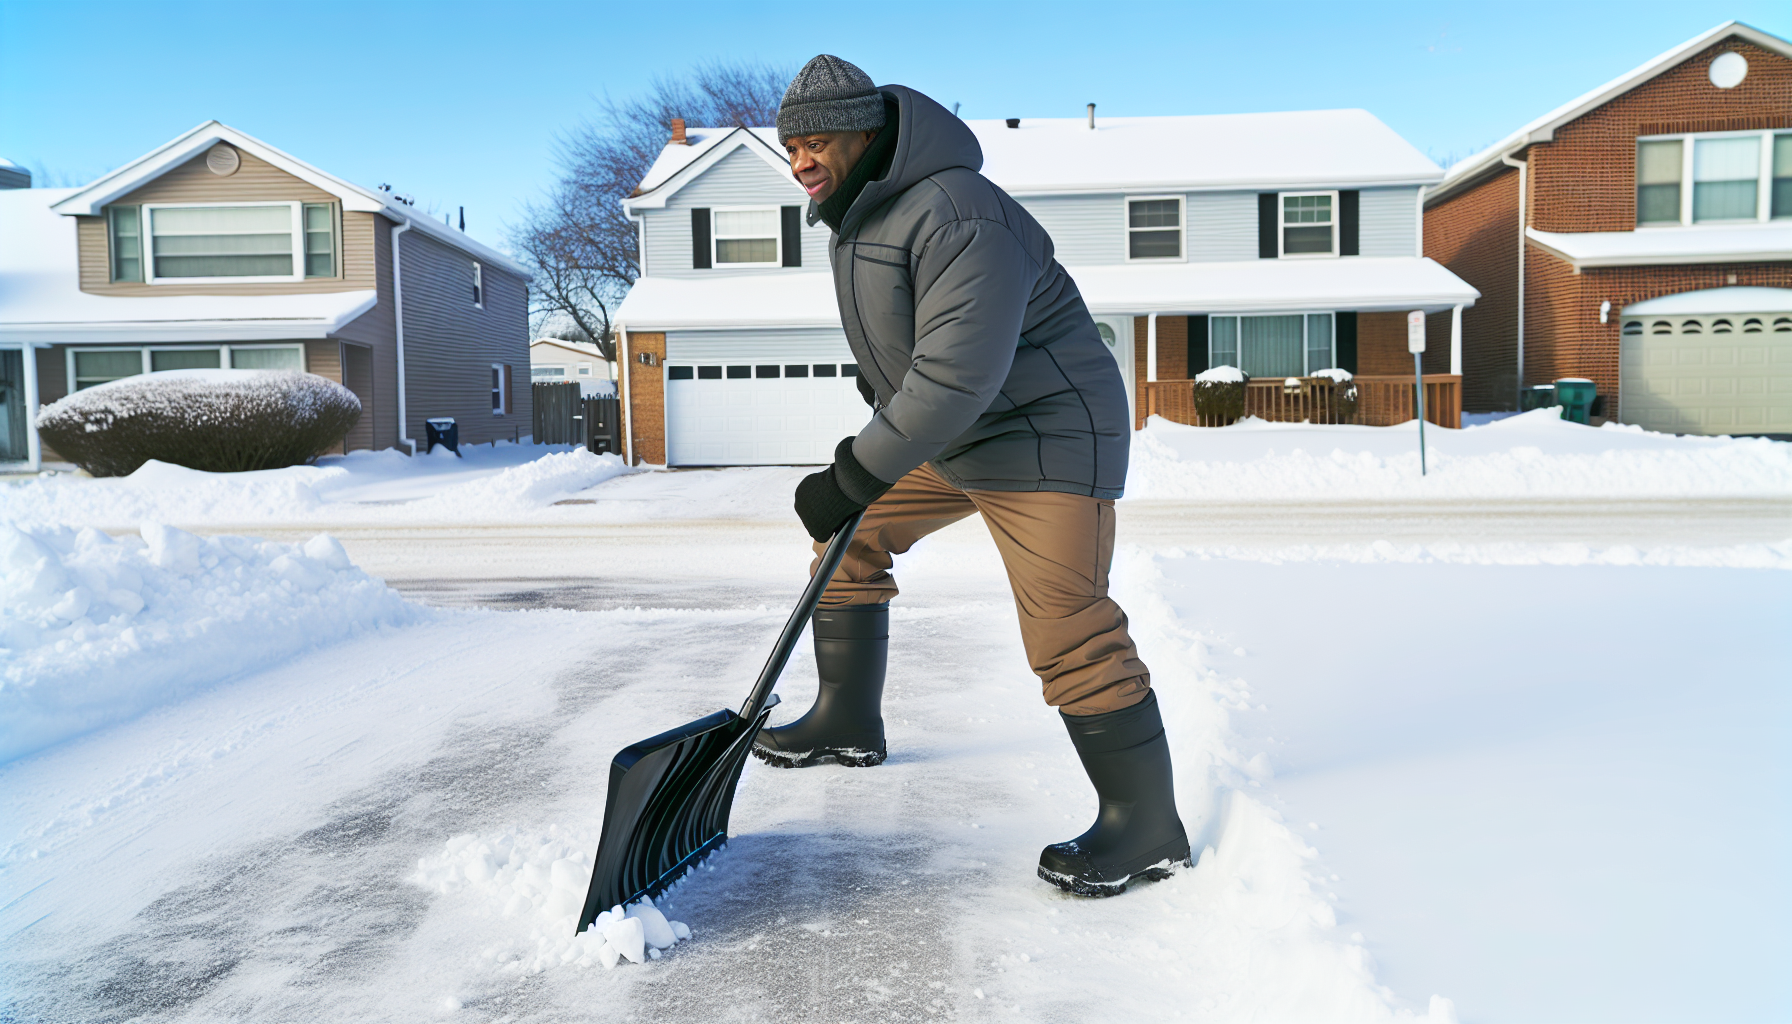 Safe shoveling techniques to prevent injuries